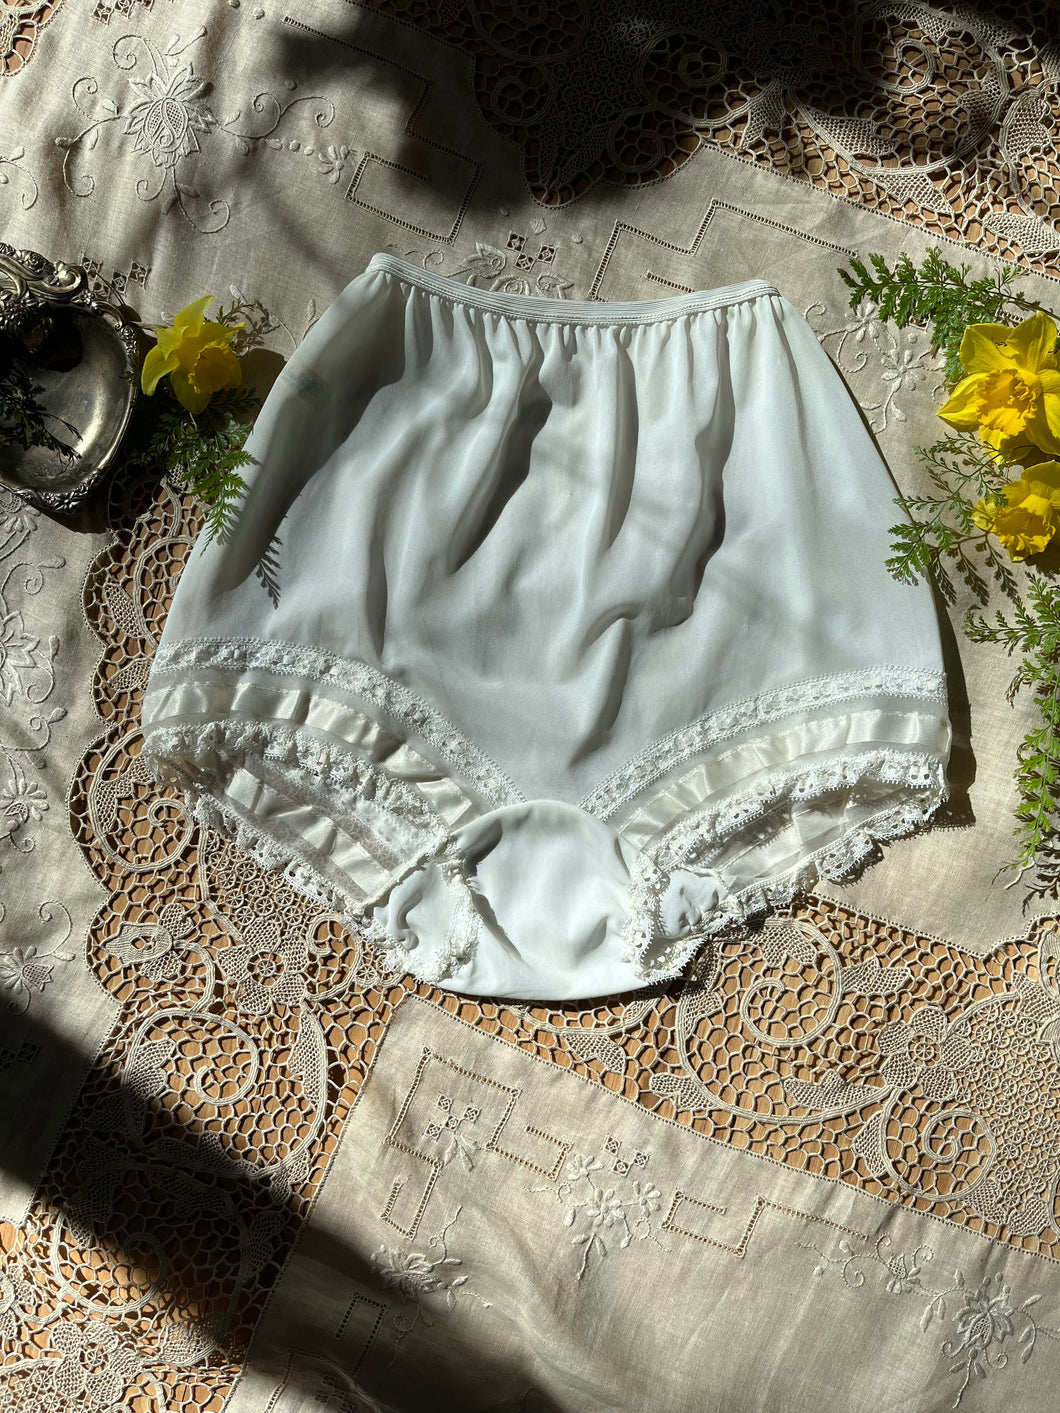 Authentic 1950’s vintage Michelene White Nylon and Lace Granny Panties